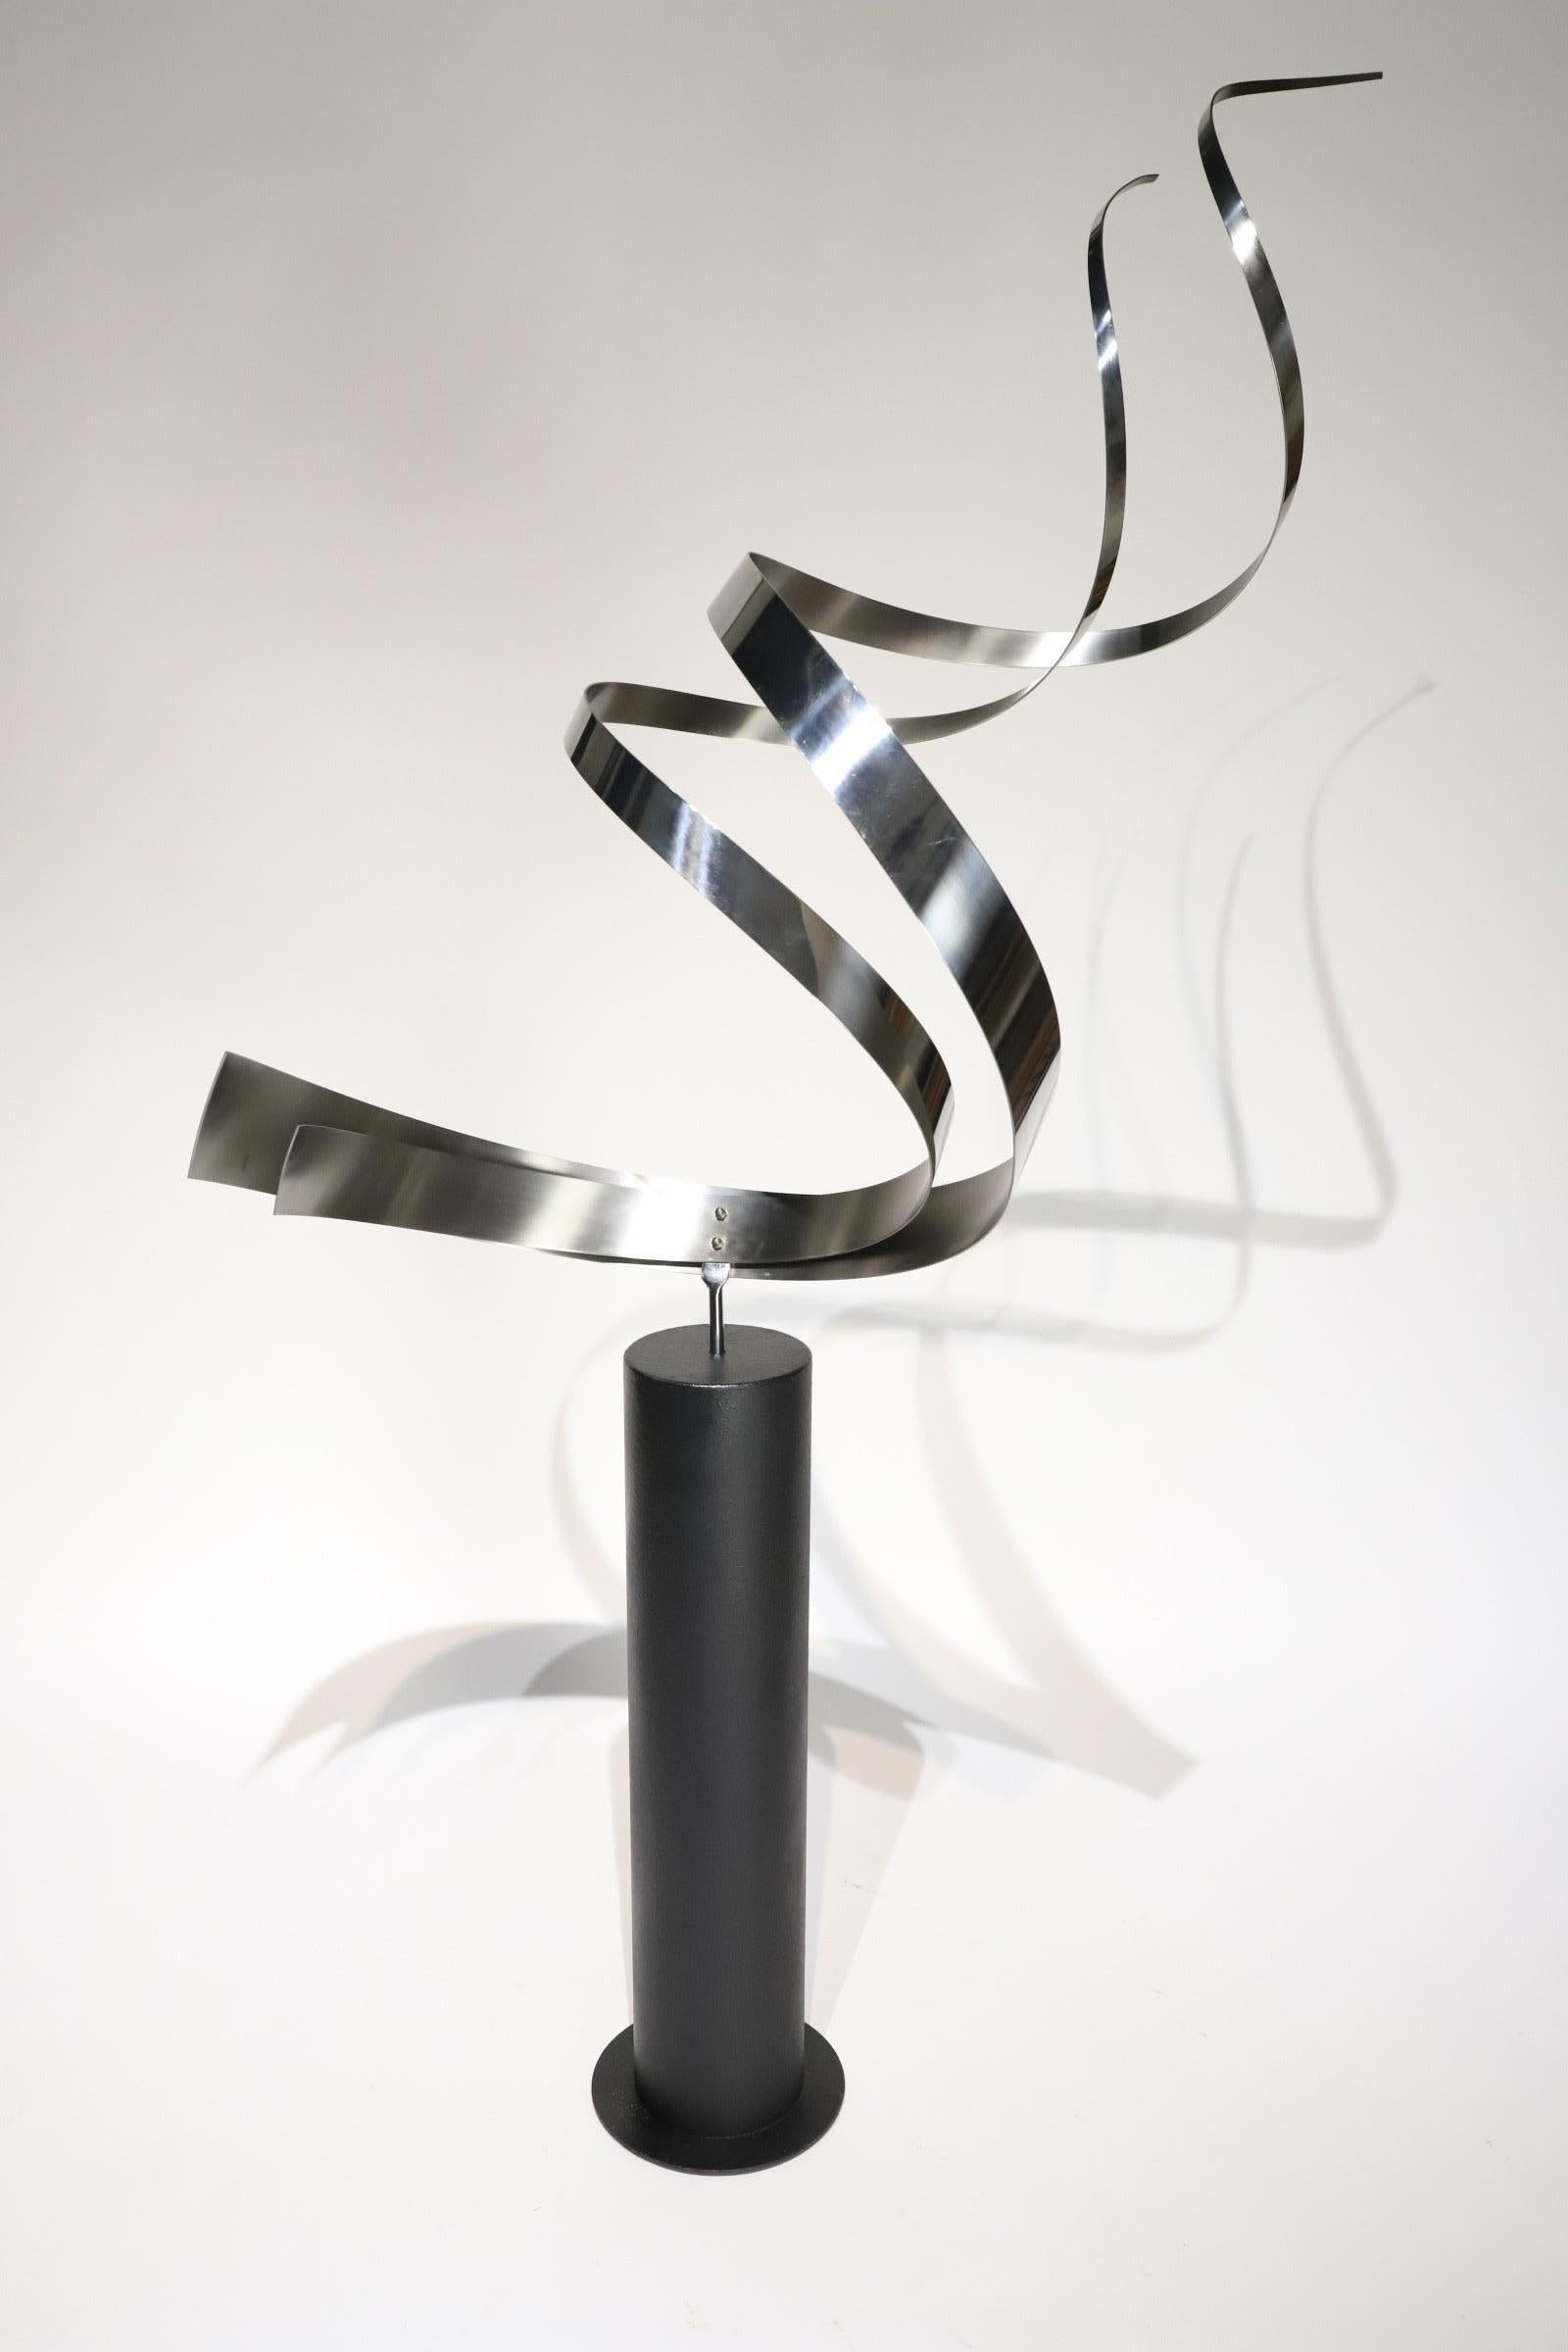 Stunning stainless steel “swirl” floor sculpture by Curtis Jere. Swirl sits atop a painted black steel base and swivels, allowing the perfect placement. Pictured with Milo Baughman for Thayer Coggin dining chairs for scale. This is a large piece and